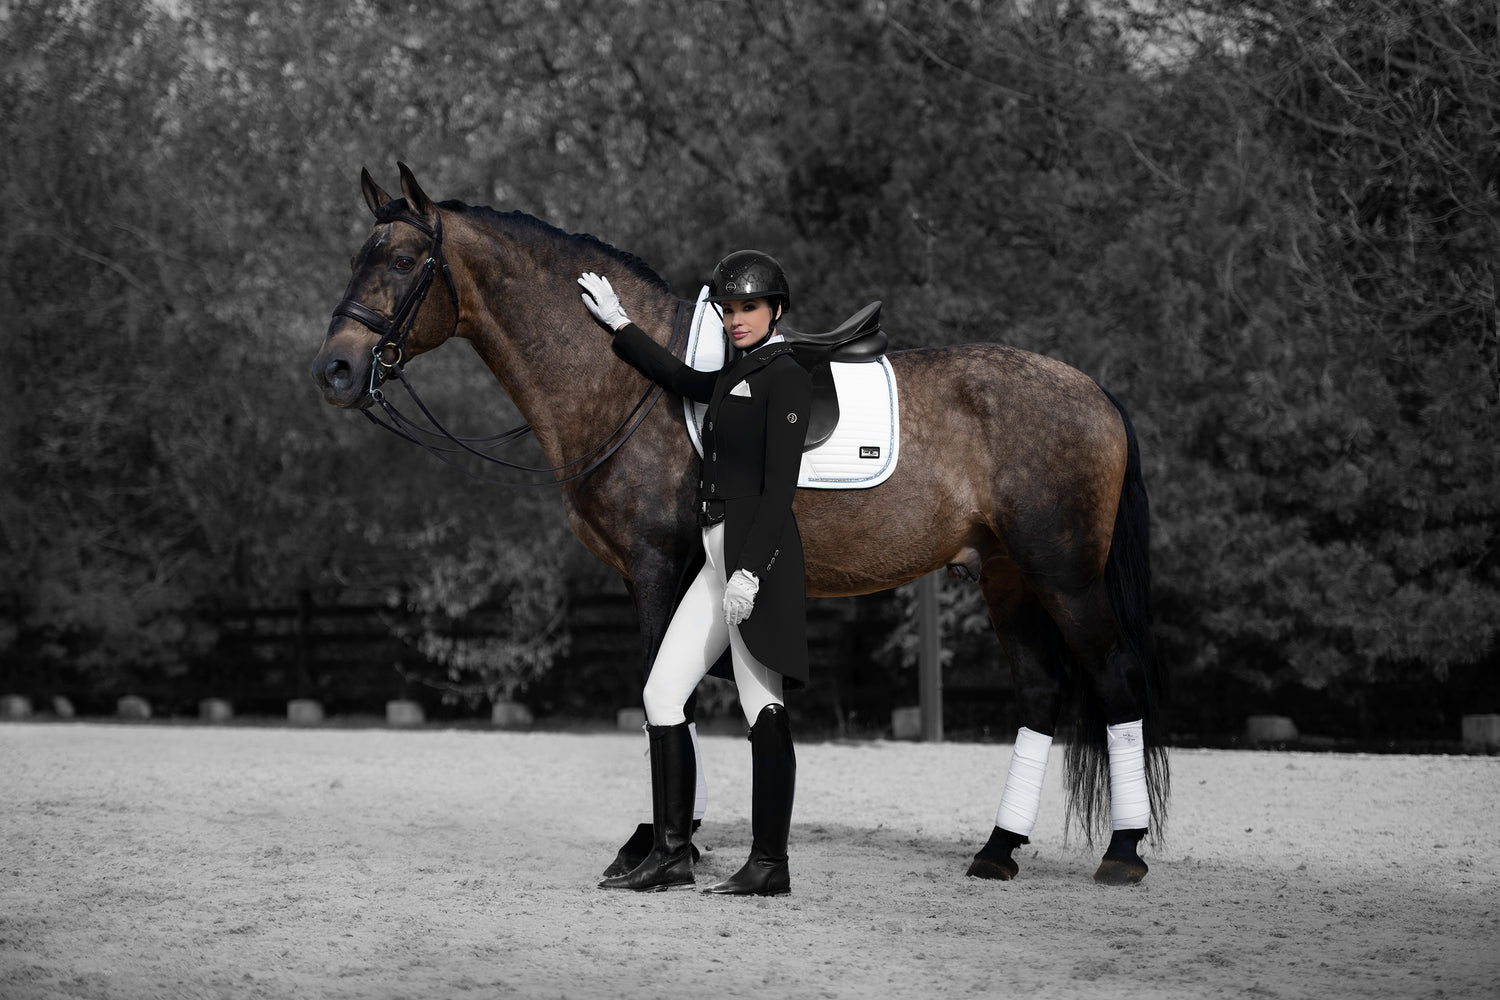 Dressage outfit